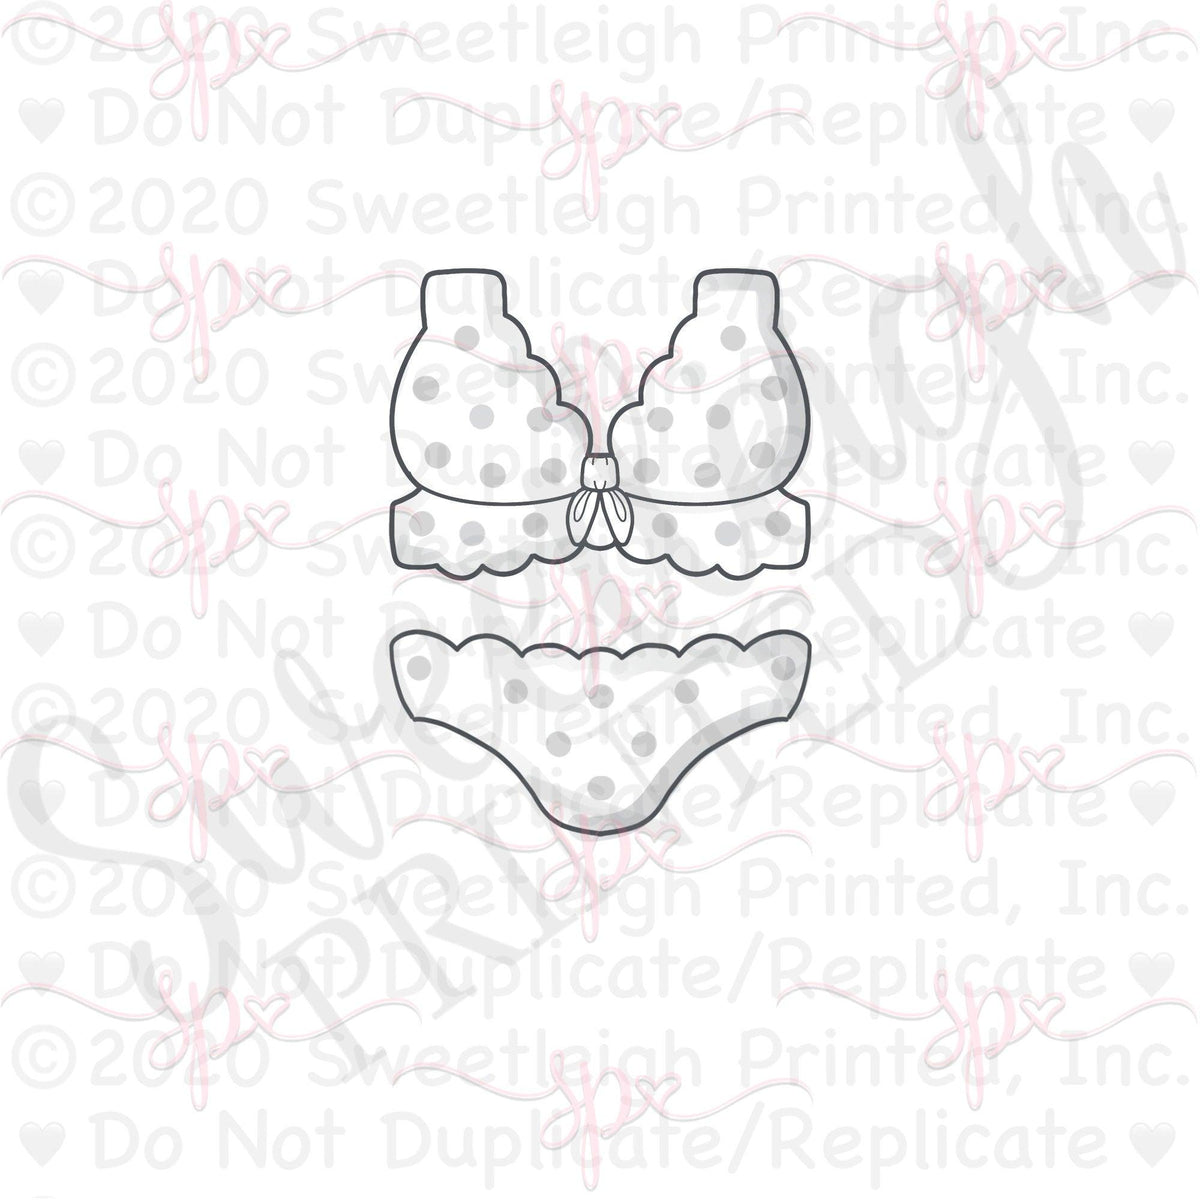 Lace Lingerie 2016 Cookie Cutter Set - Sweetleigh 